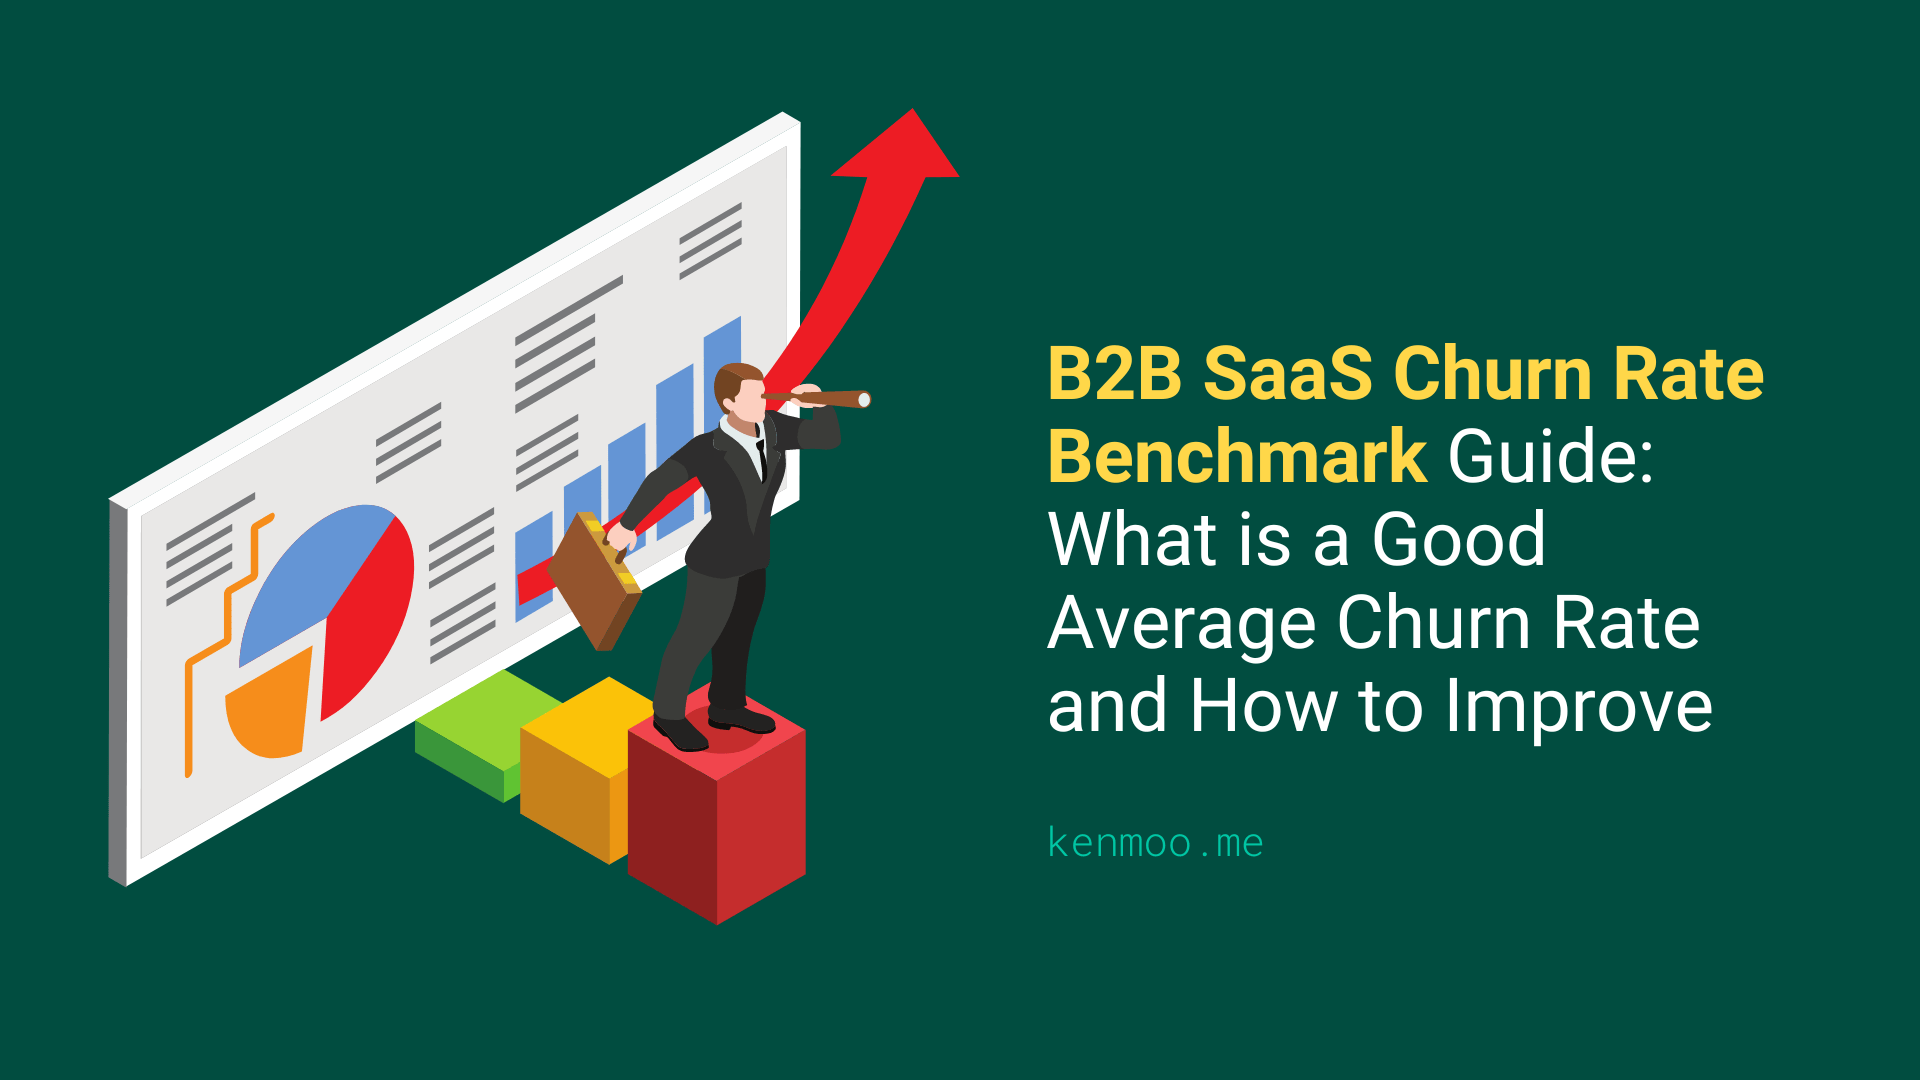 B2B SaaS Churn Rate Benchmark Guide: What is a Good Average Churn Rate and How to Improve